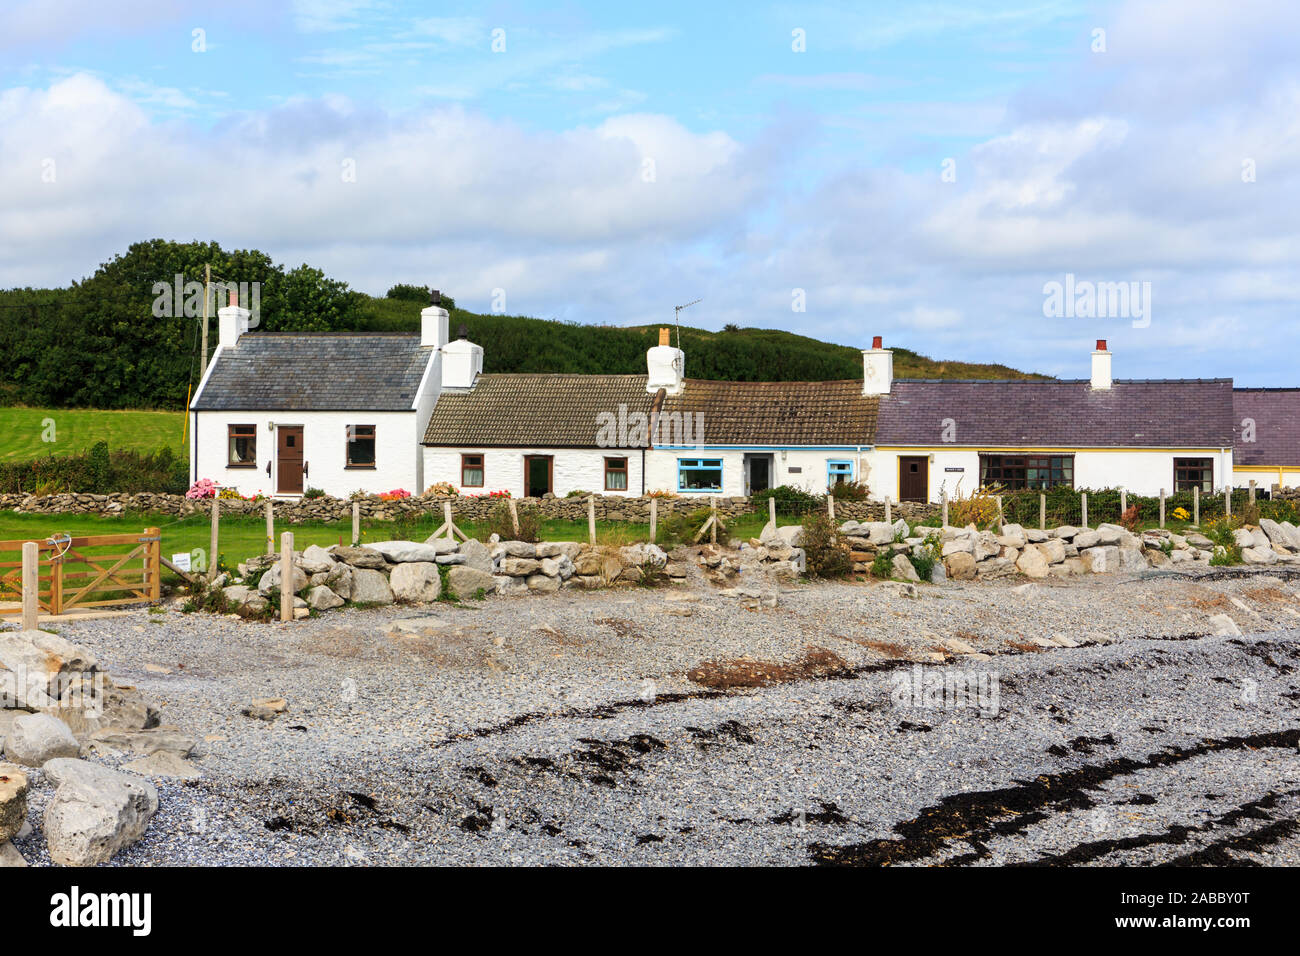 Spiaggia di ghiaie a Moelfre, Anglesey, Galles Foto Stock